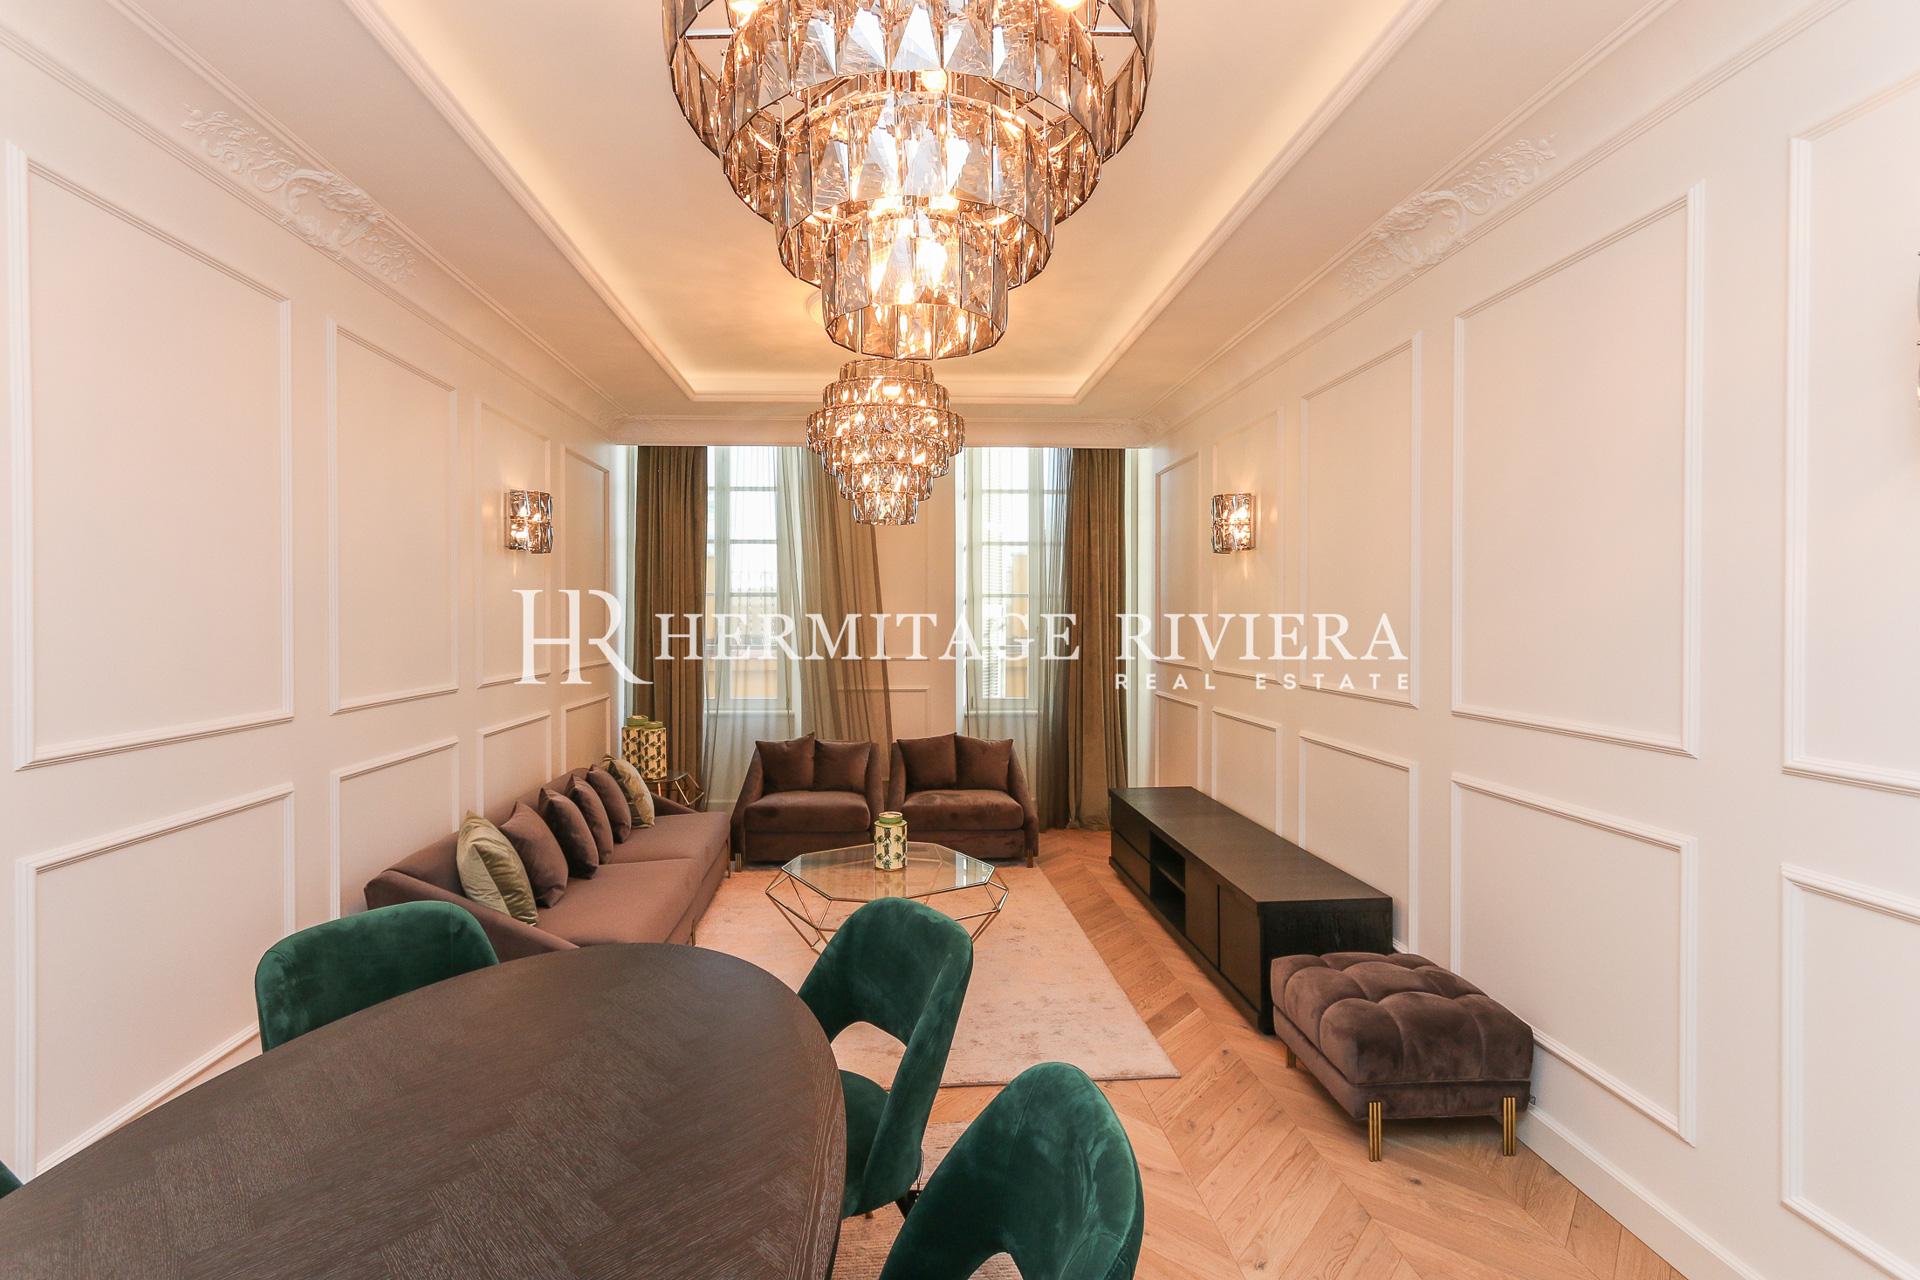 Sumptuous apartment in an exceptional location (image 8)